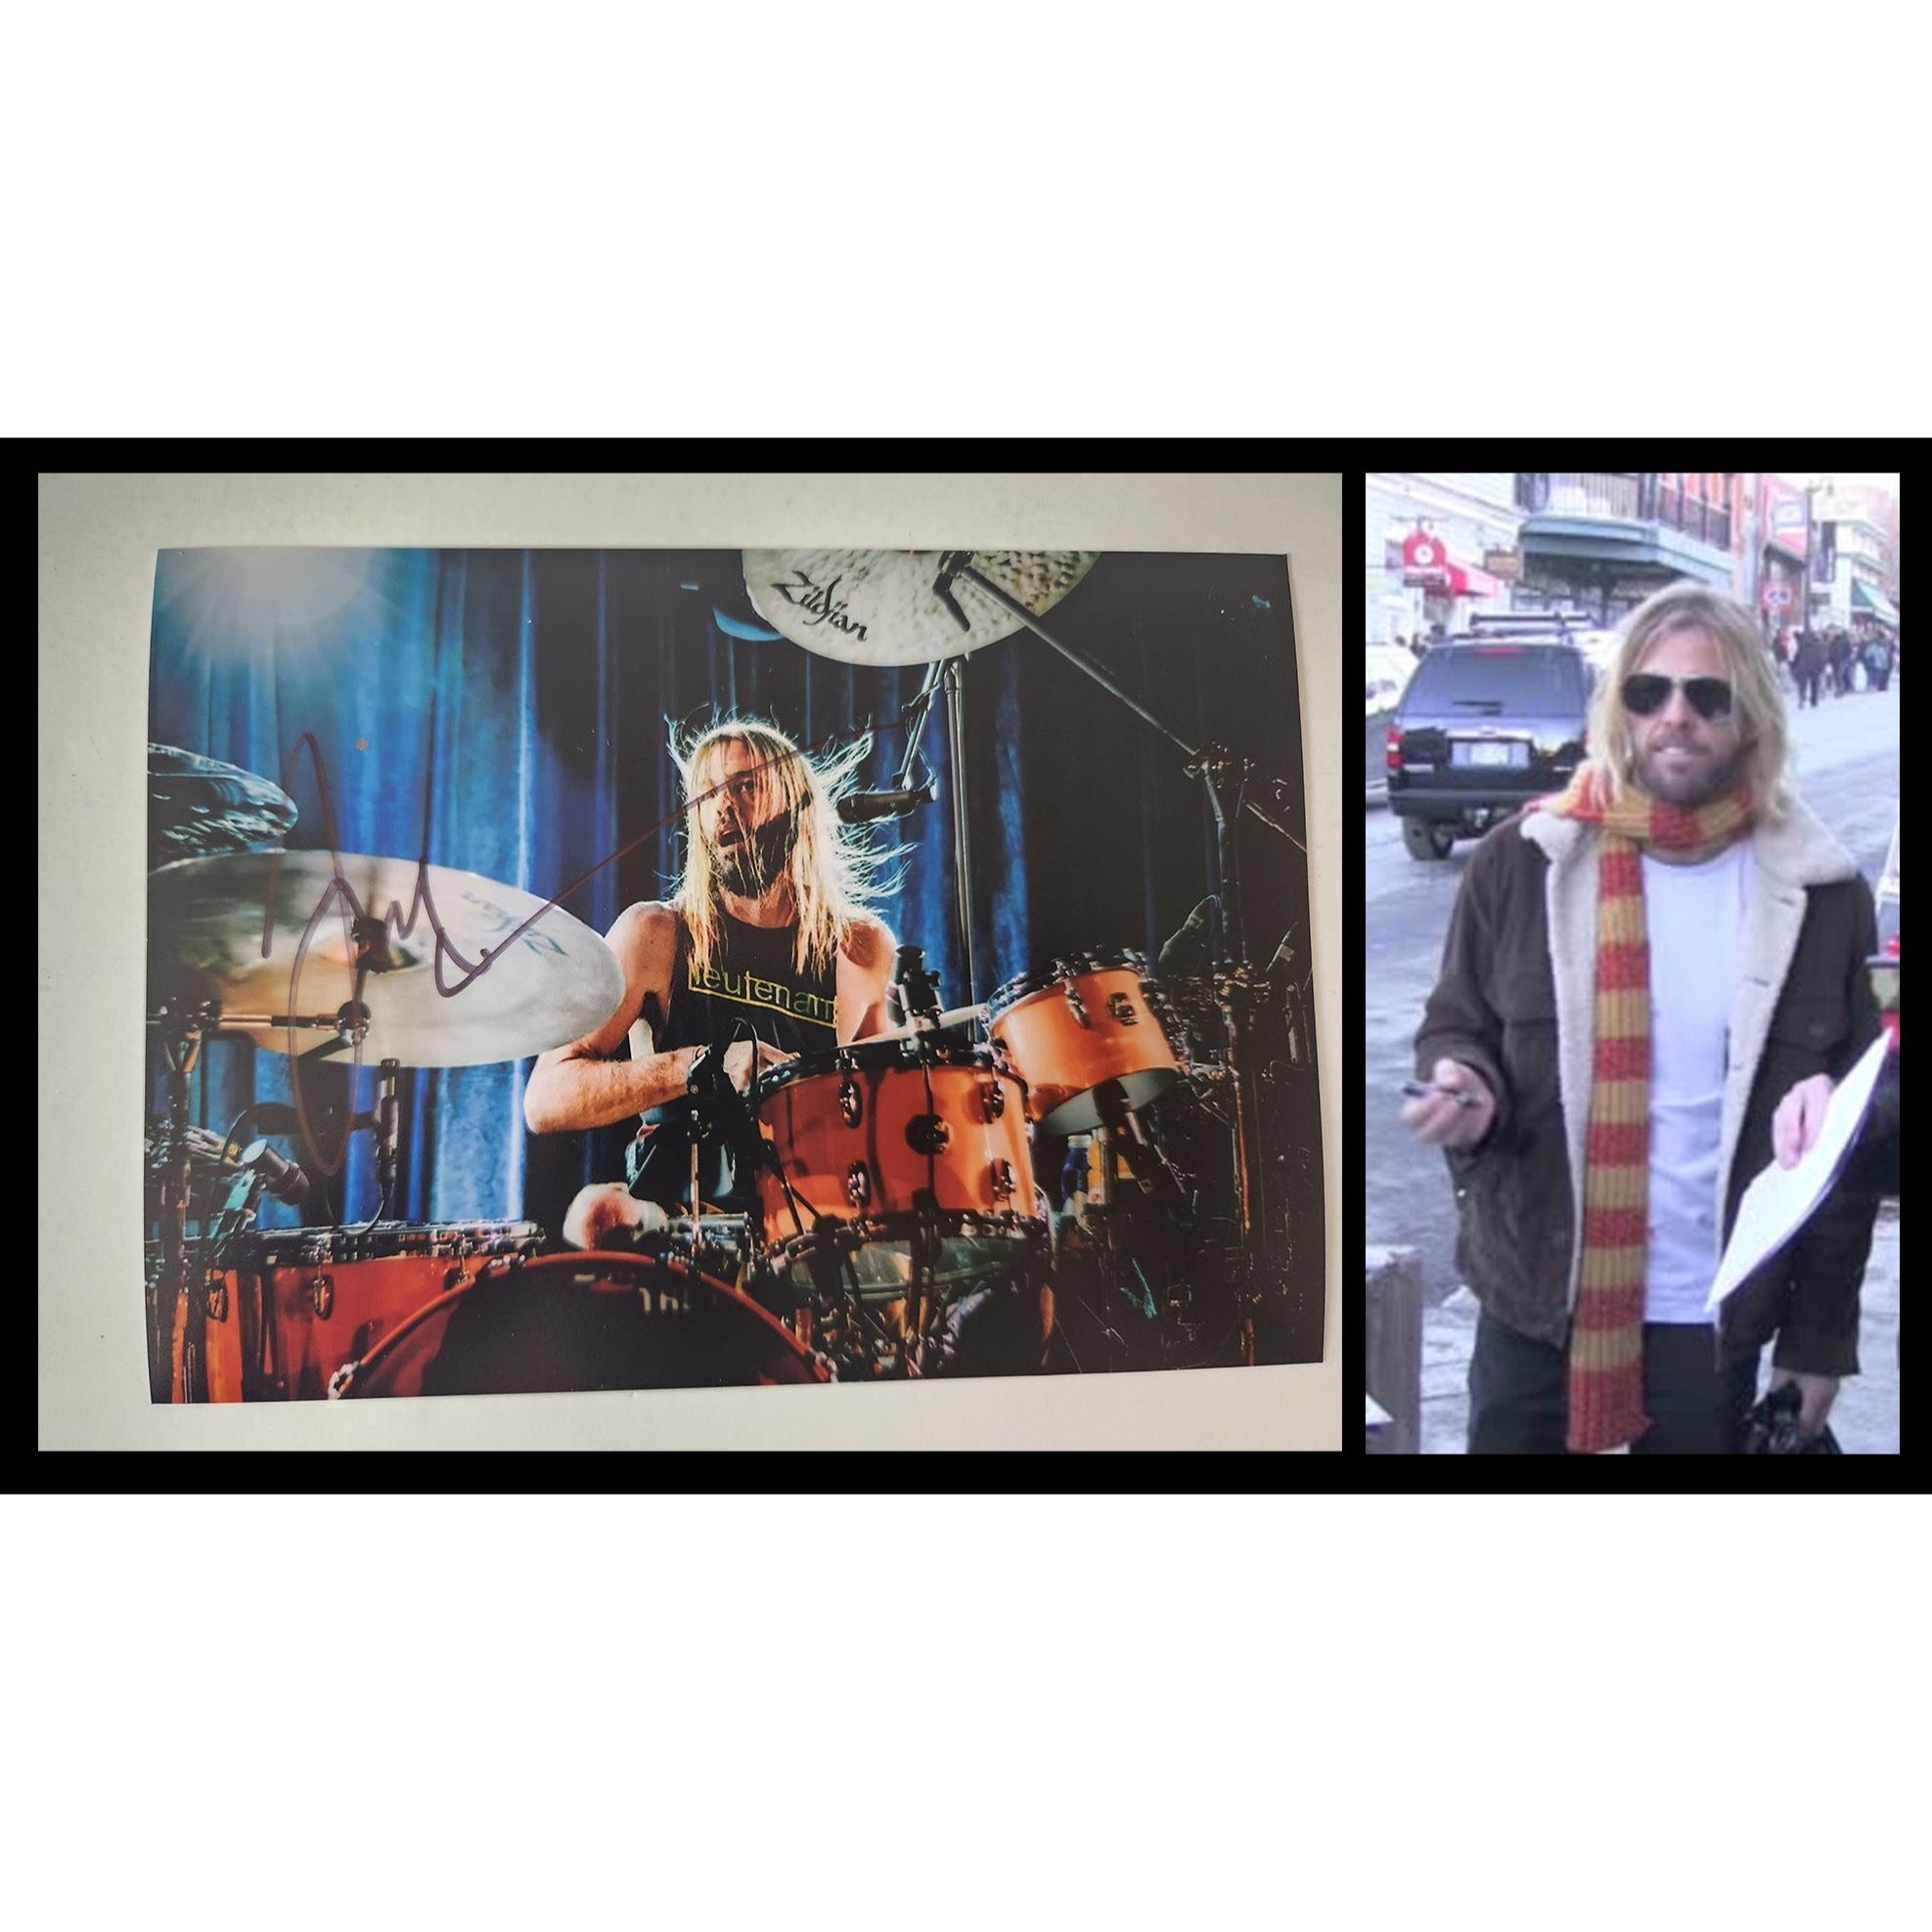 Taylor Hawkins Foo Fighters legendary drummer 5x7 photo signed with proof